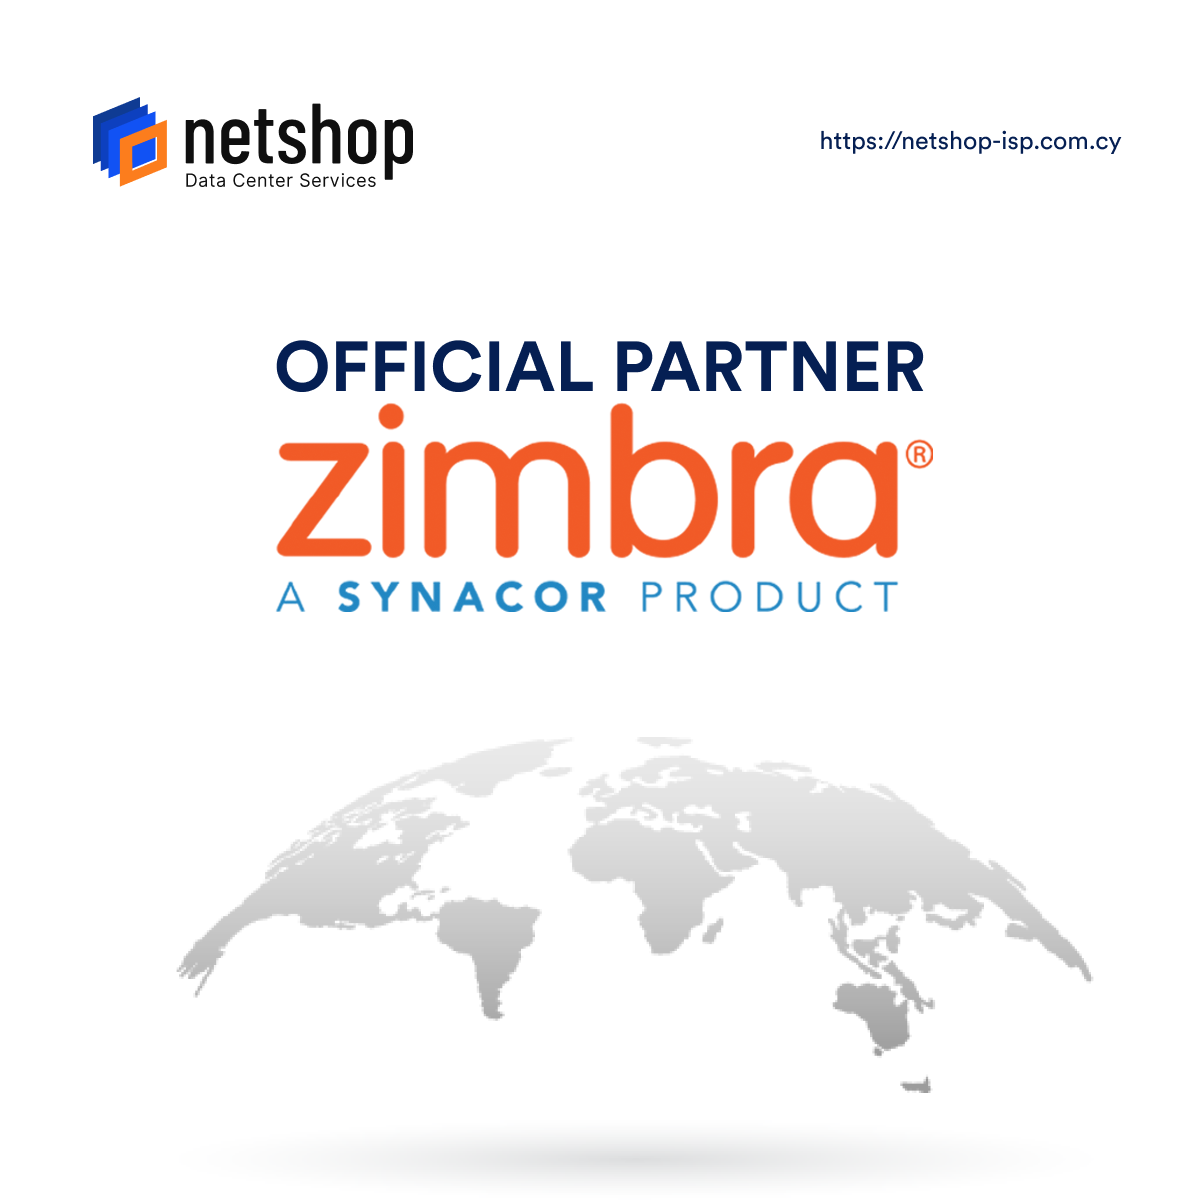 NetShop ISP Announces Partnership with Synacor for Zimbra Email and  Collaboration Platform, by NetShop ISP